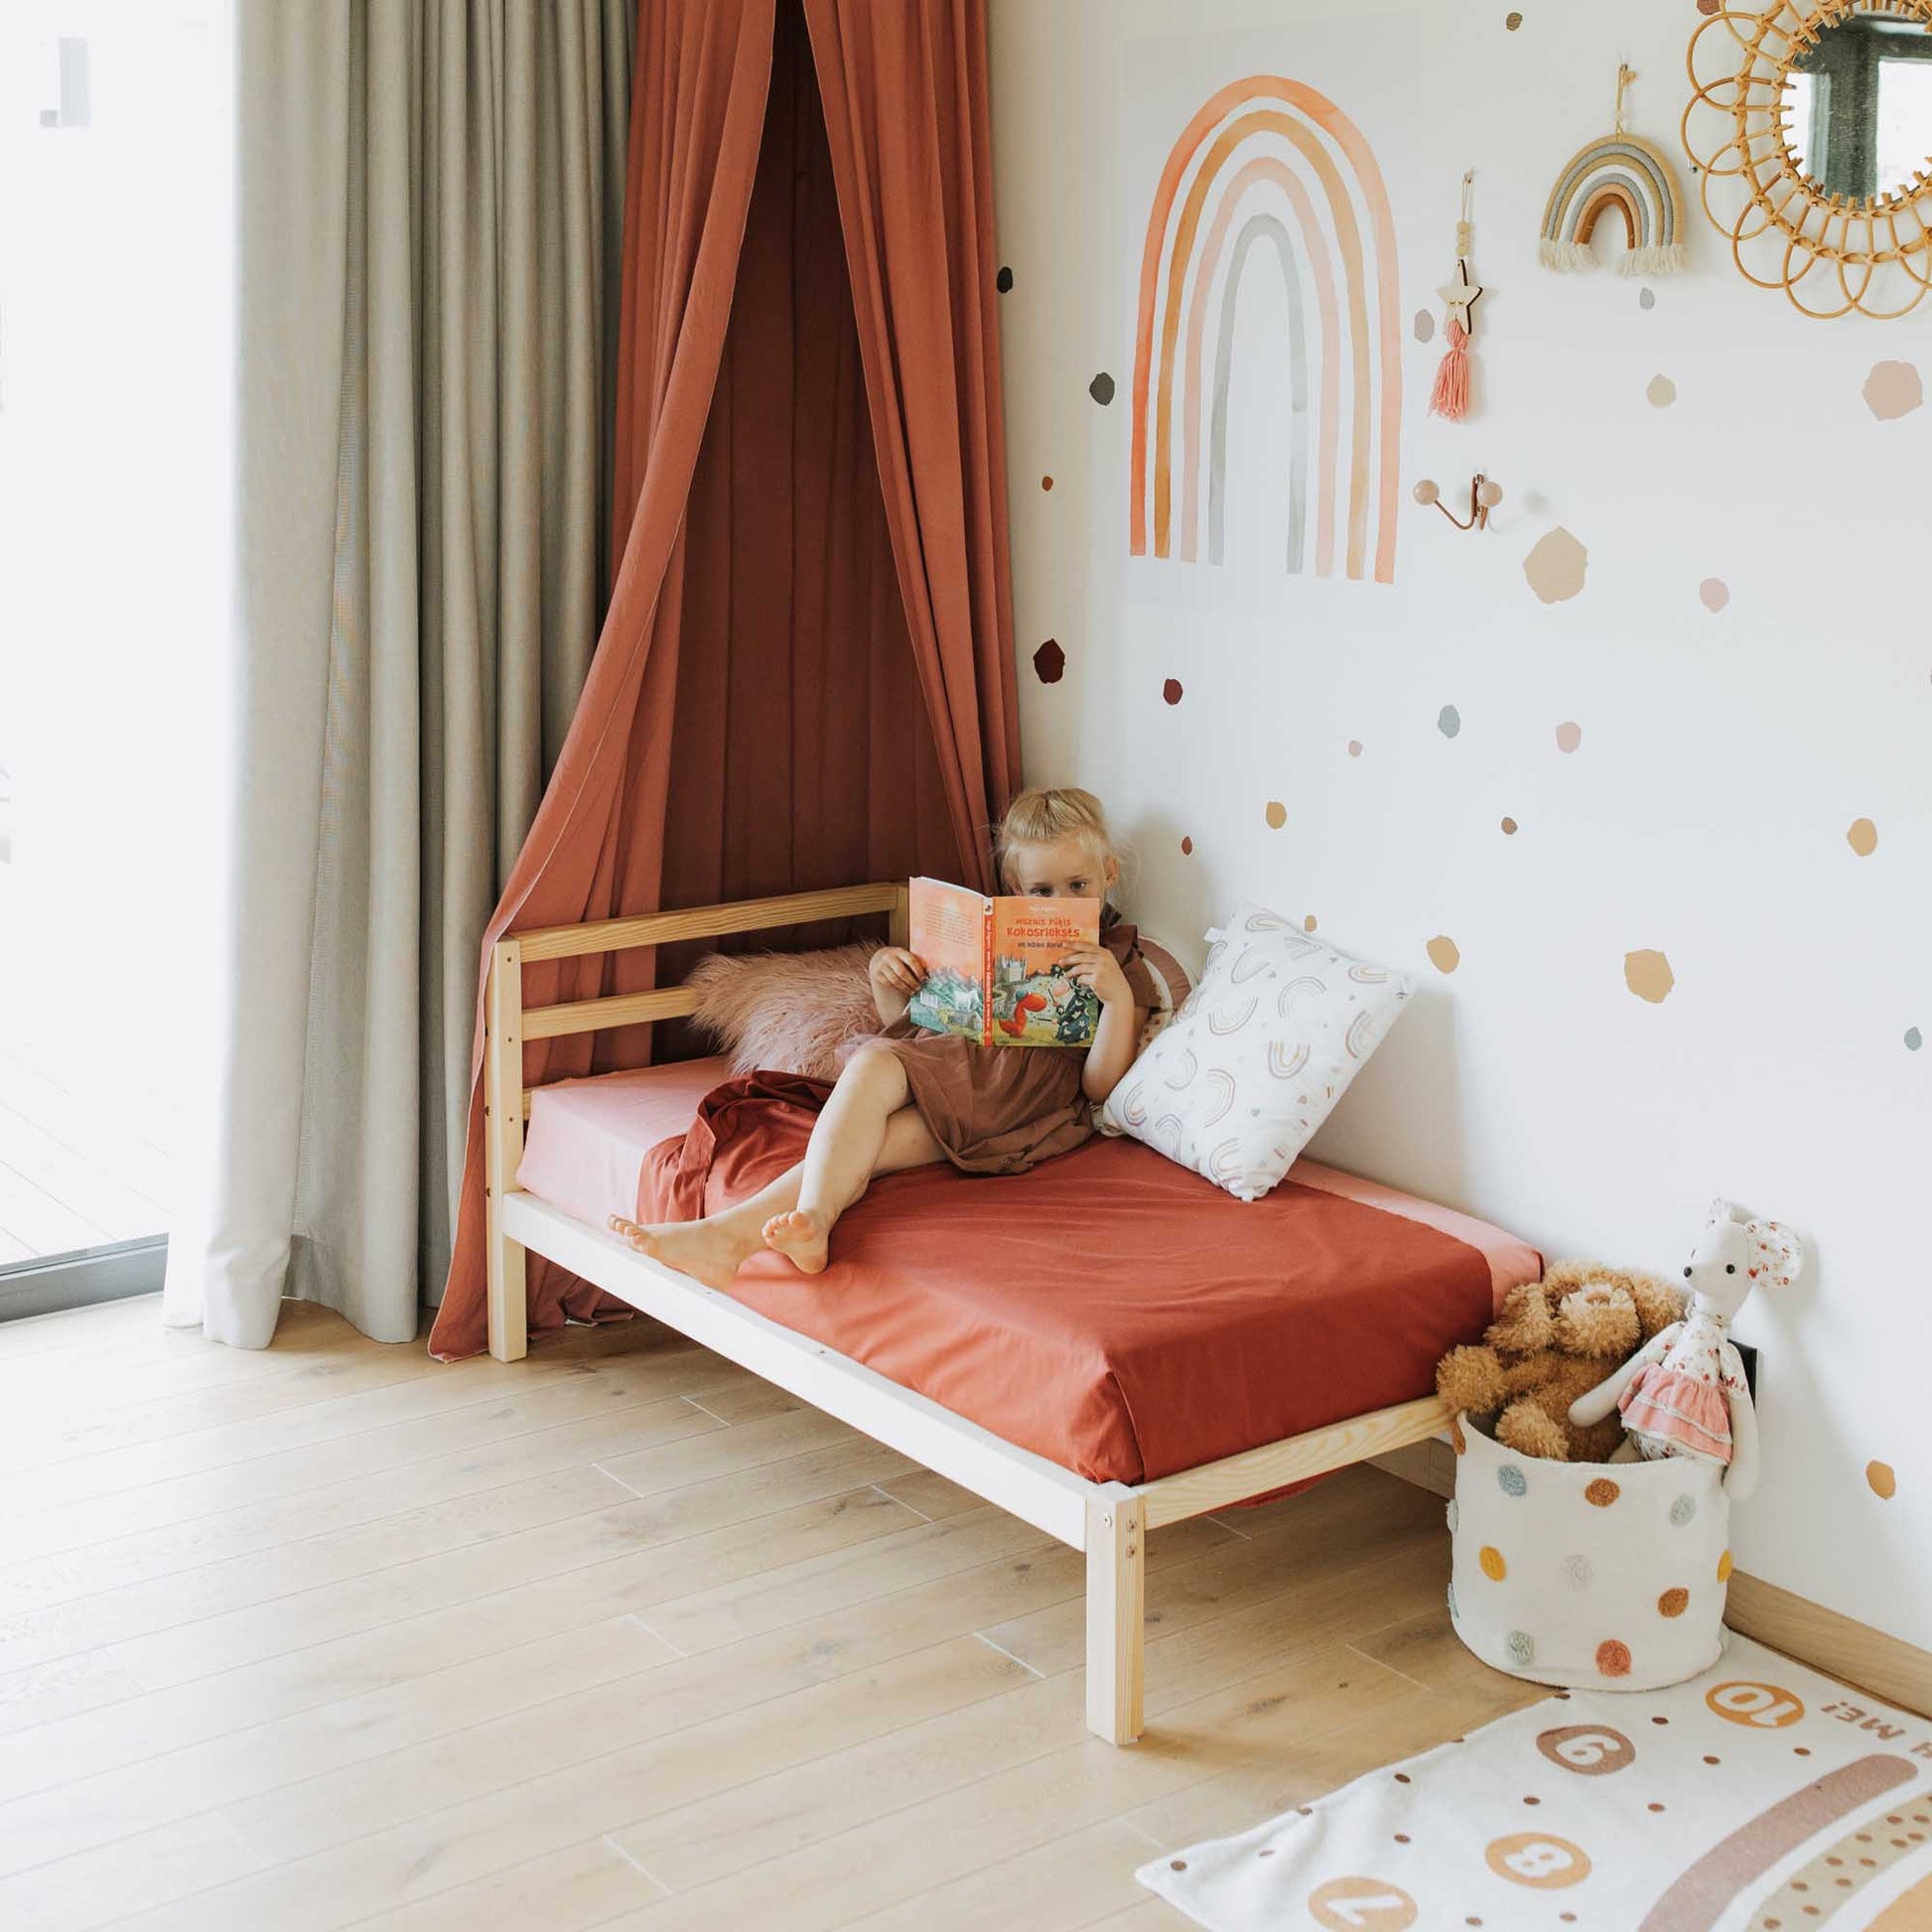 A child's room with a Sweet Home From Wood kids' bed on legs with a horizontal rail headboard and a rainbow wall decal.